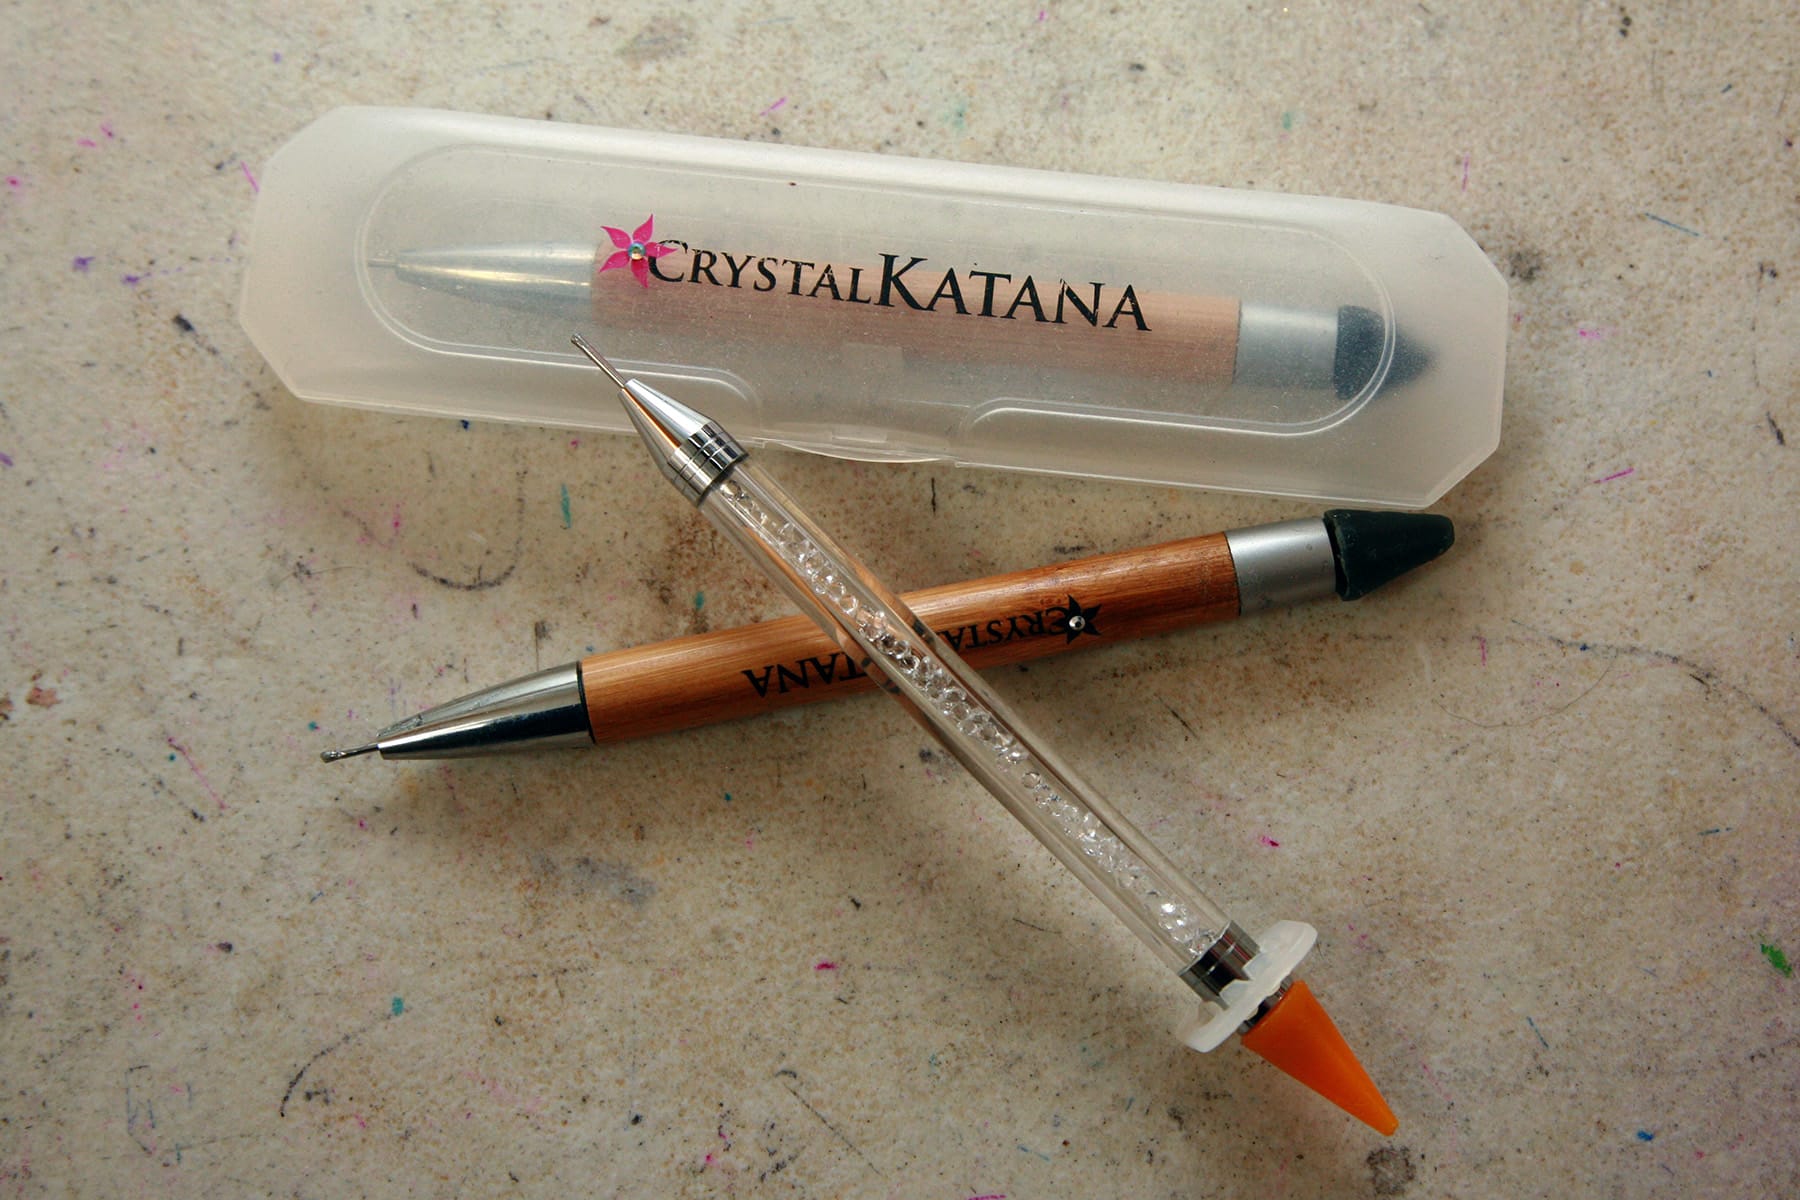 2 Crystal Katanas and an off-brand wax stick, used for crystalling spandex costumes.